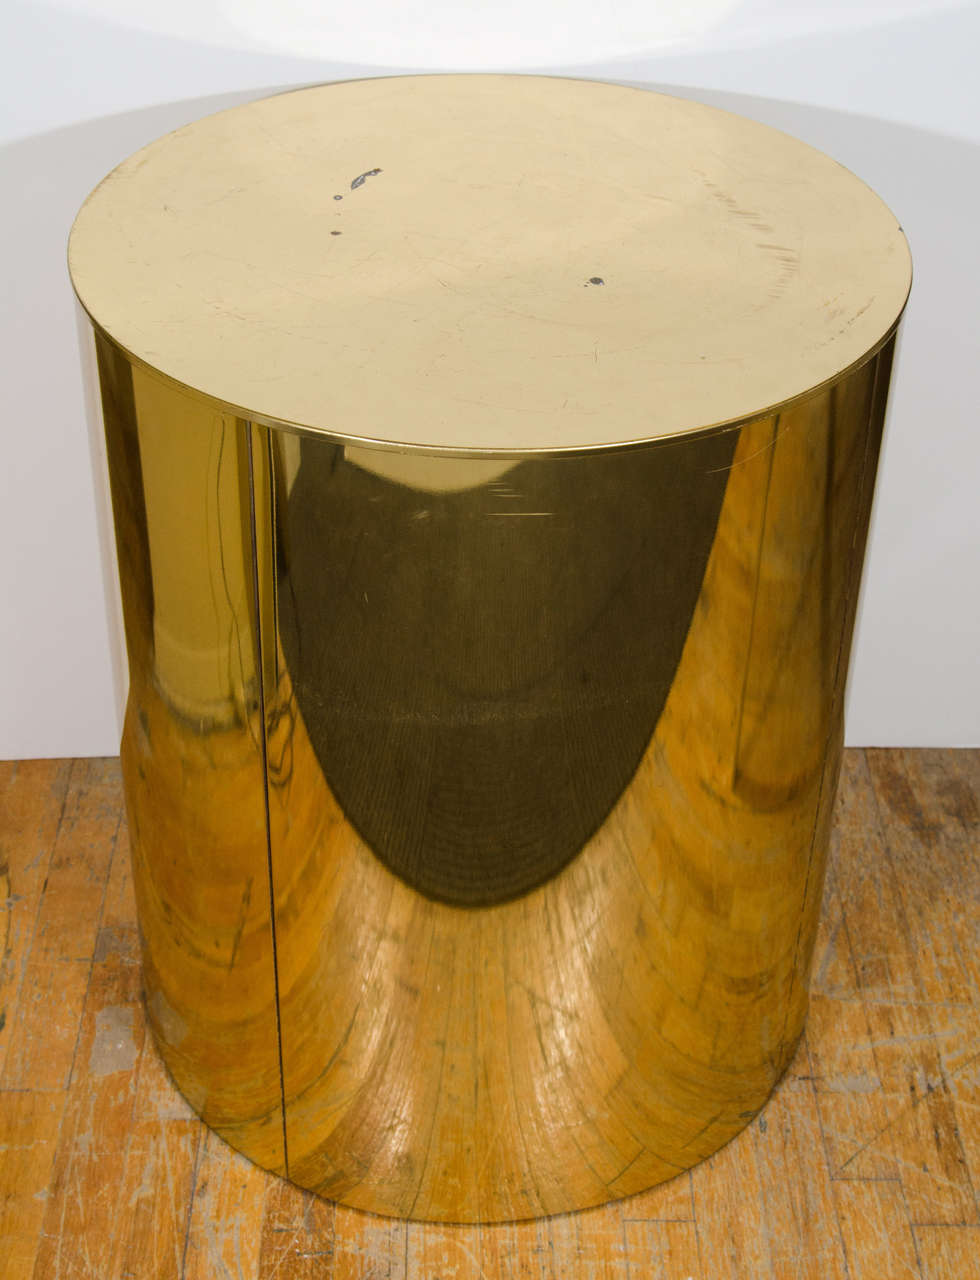 A vintage cylindrical brass drum table signed C. Jeré. Can be used as a dining table (it supports a glass top) or as a pedestal.

Fair condition with scratches, wear, and dings.